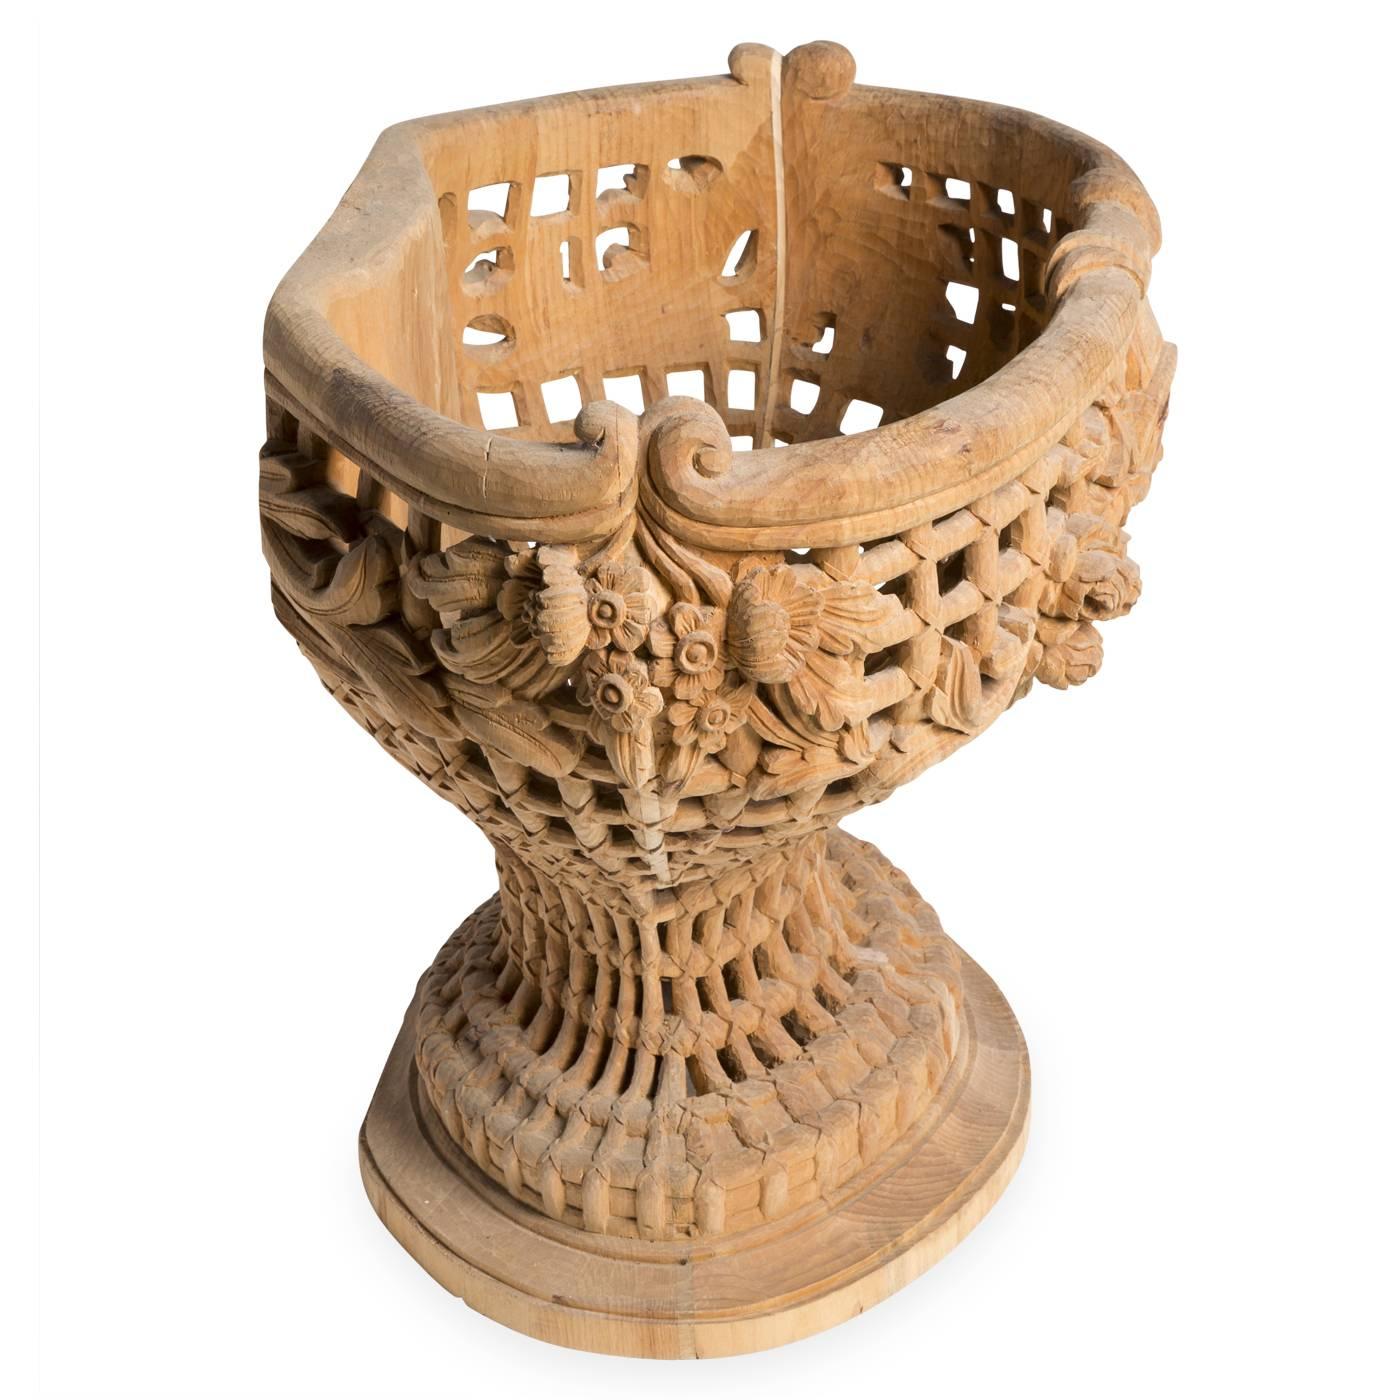 Ornamental flower basket by Bartolozzi e Maioli in Austrian pine. The handcrafted openwork form is decorated with floral features in high relief. The original piece was made in 1980 for a private residence in California.